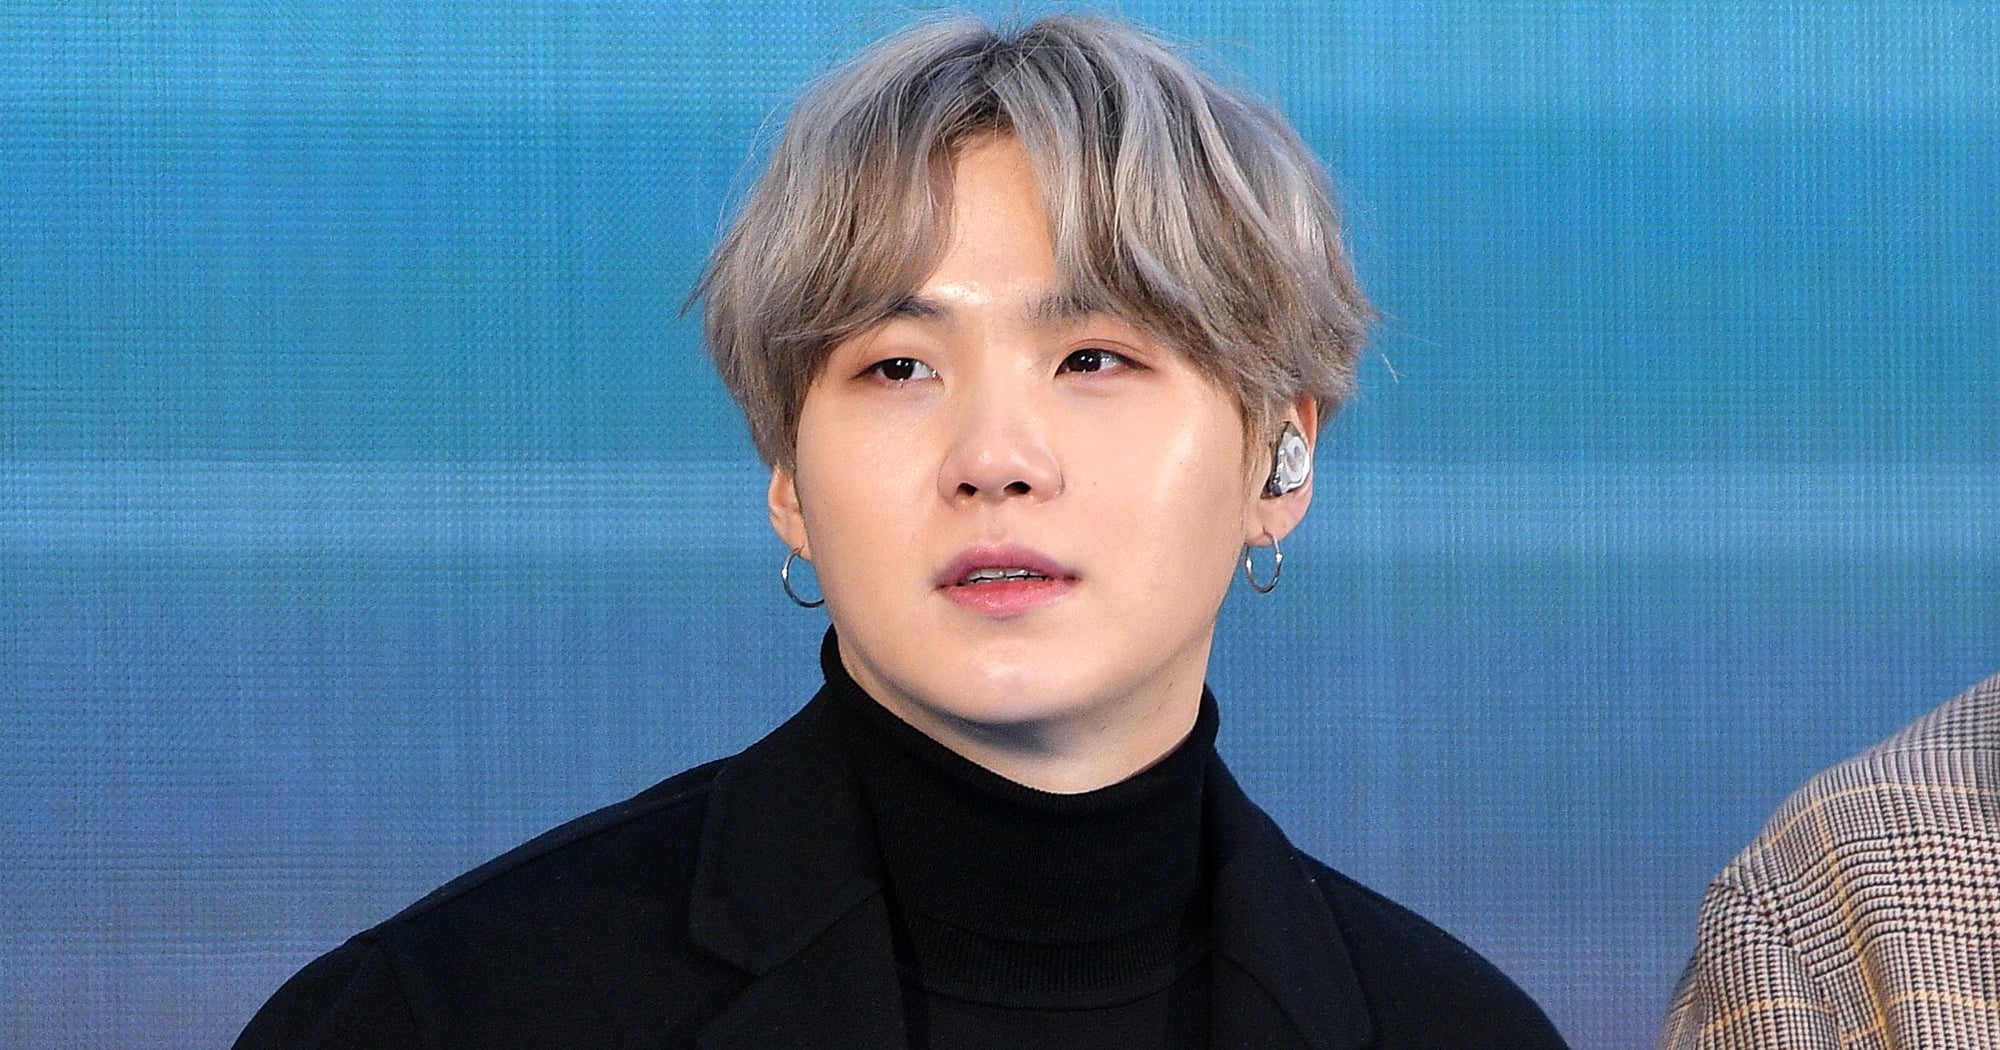 BTS Suga's Best Looks Over The Years For Your Agust D Concert